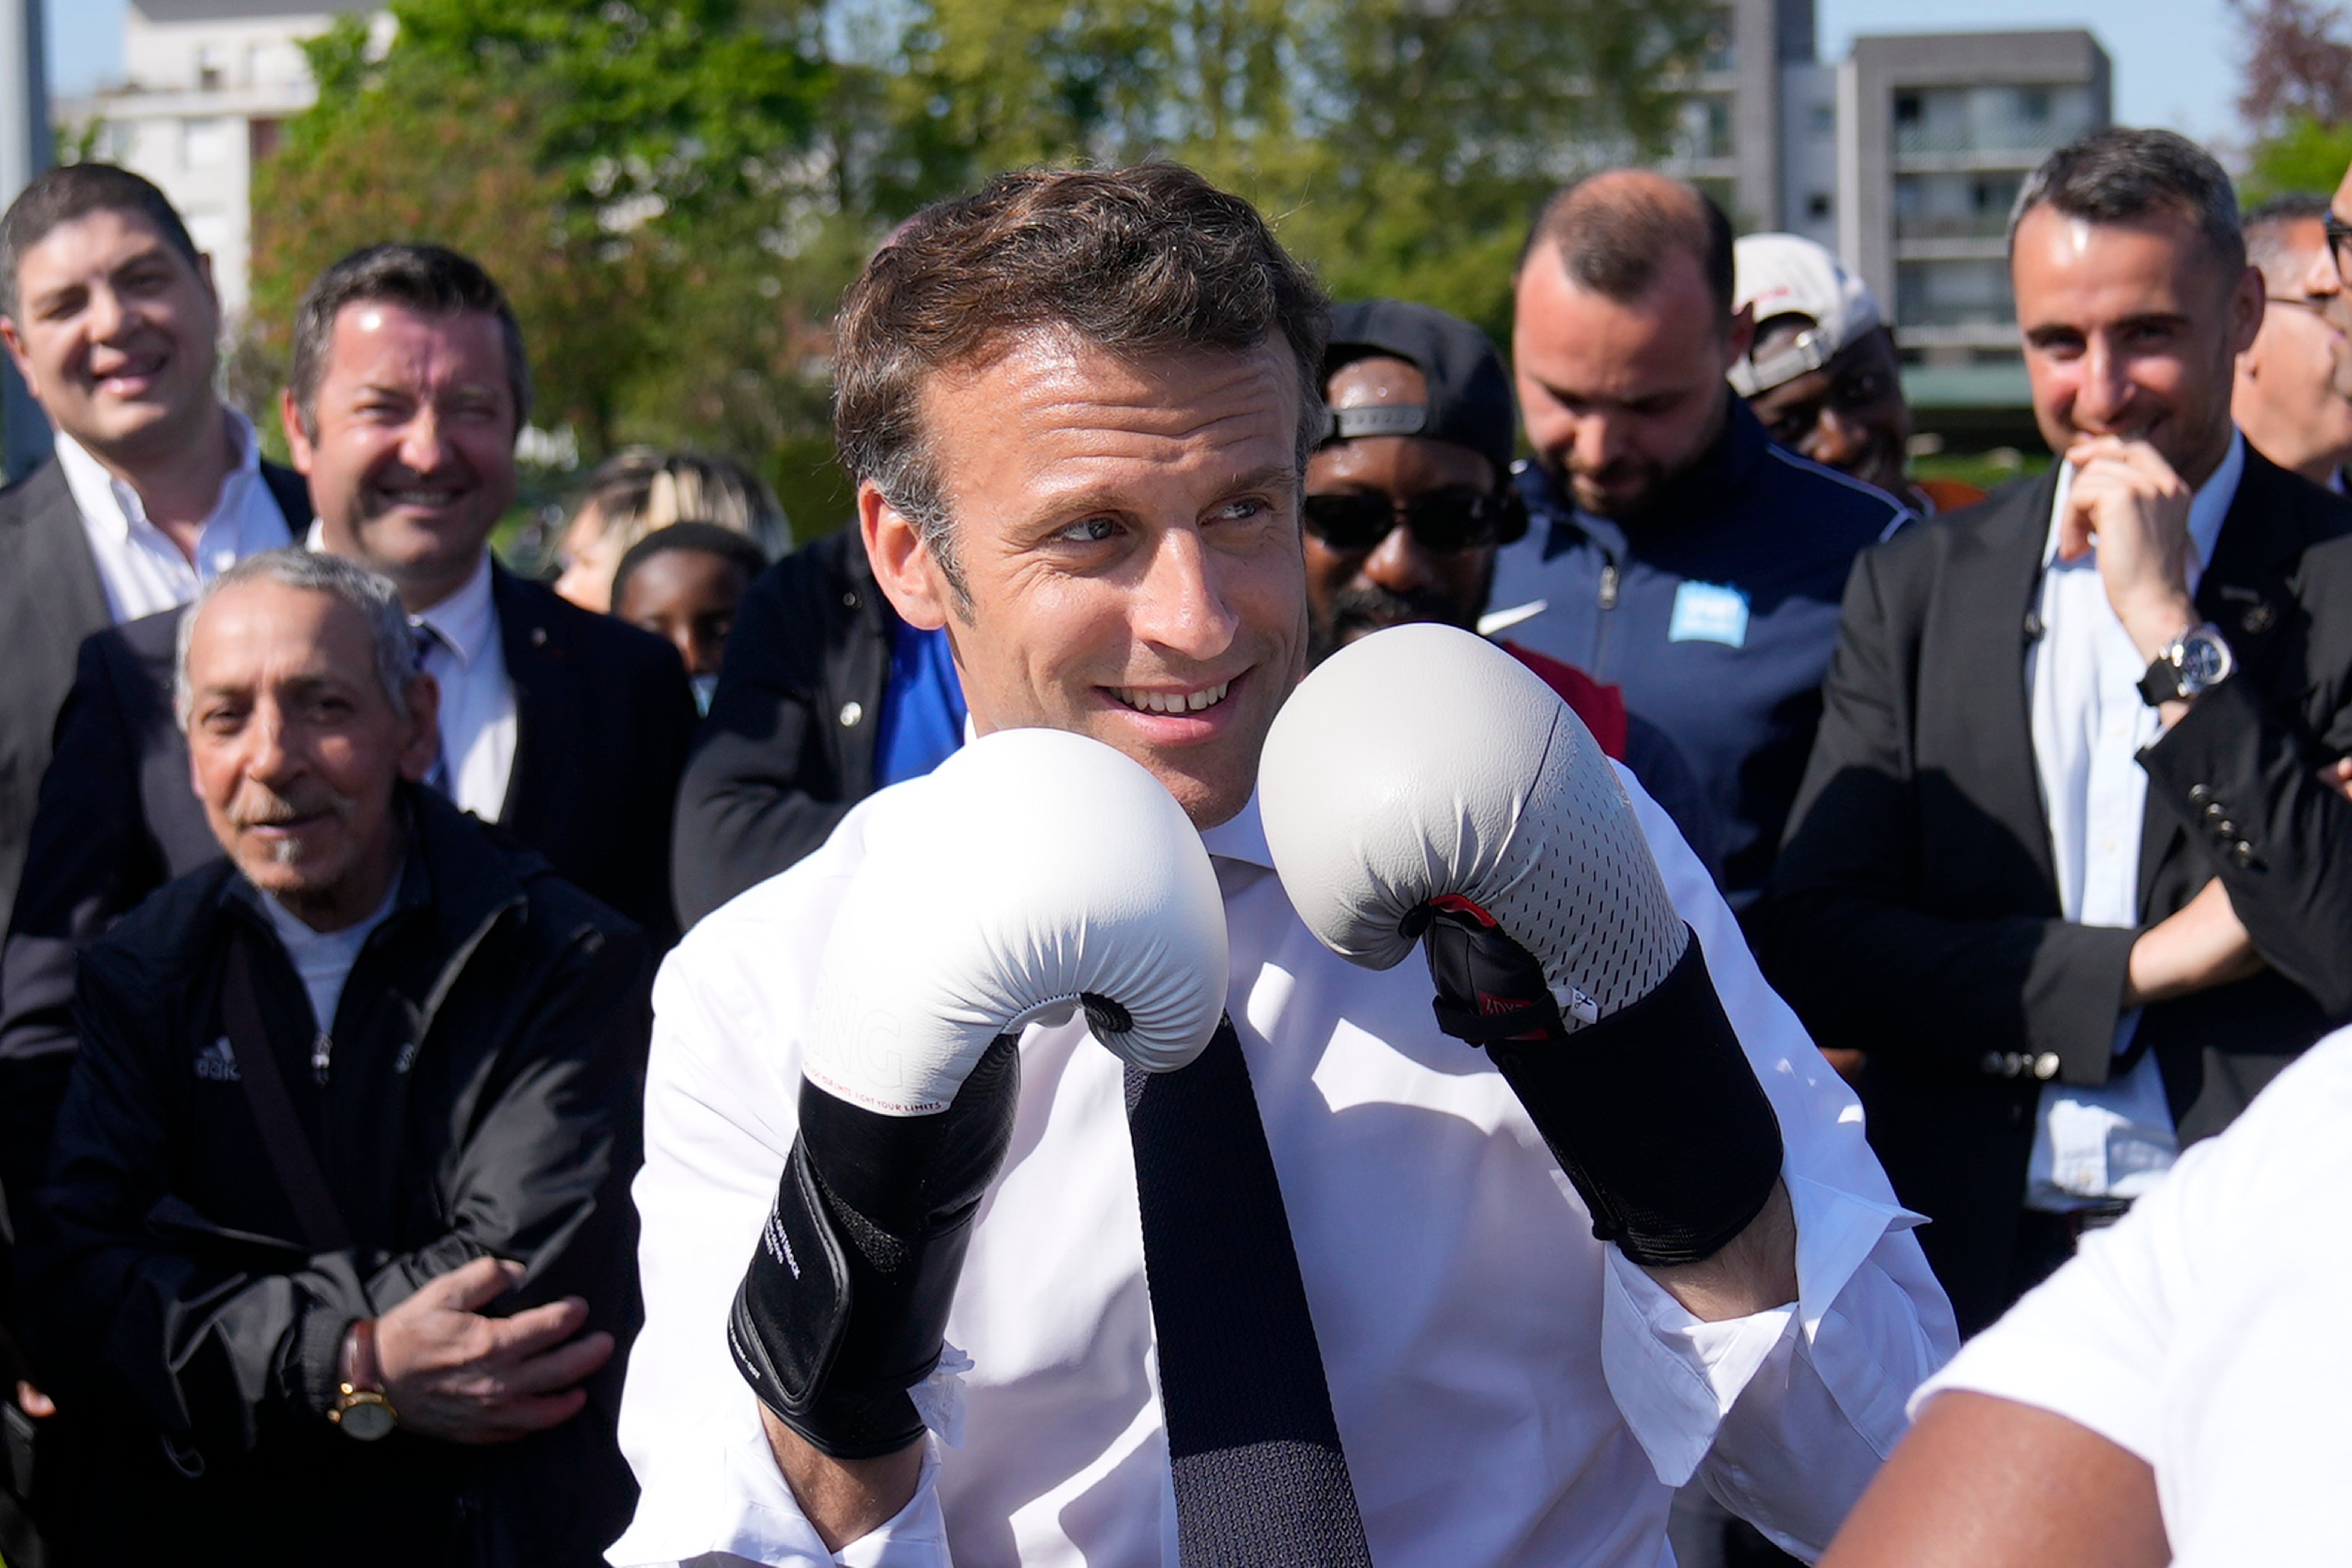 Emmanuel Macron spars in boxing gloves at a campaign event in the Auguste Delaune stadium in Saint-Denis on 21 April